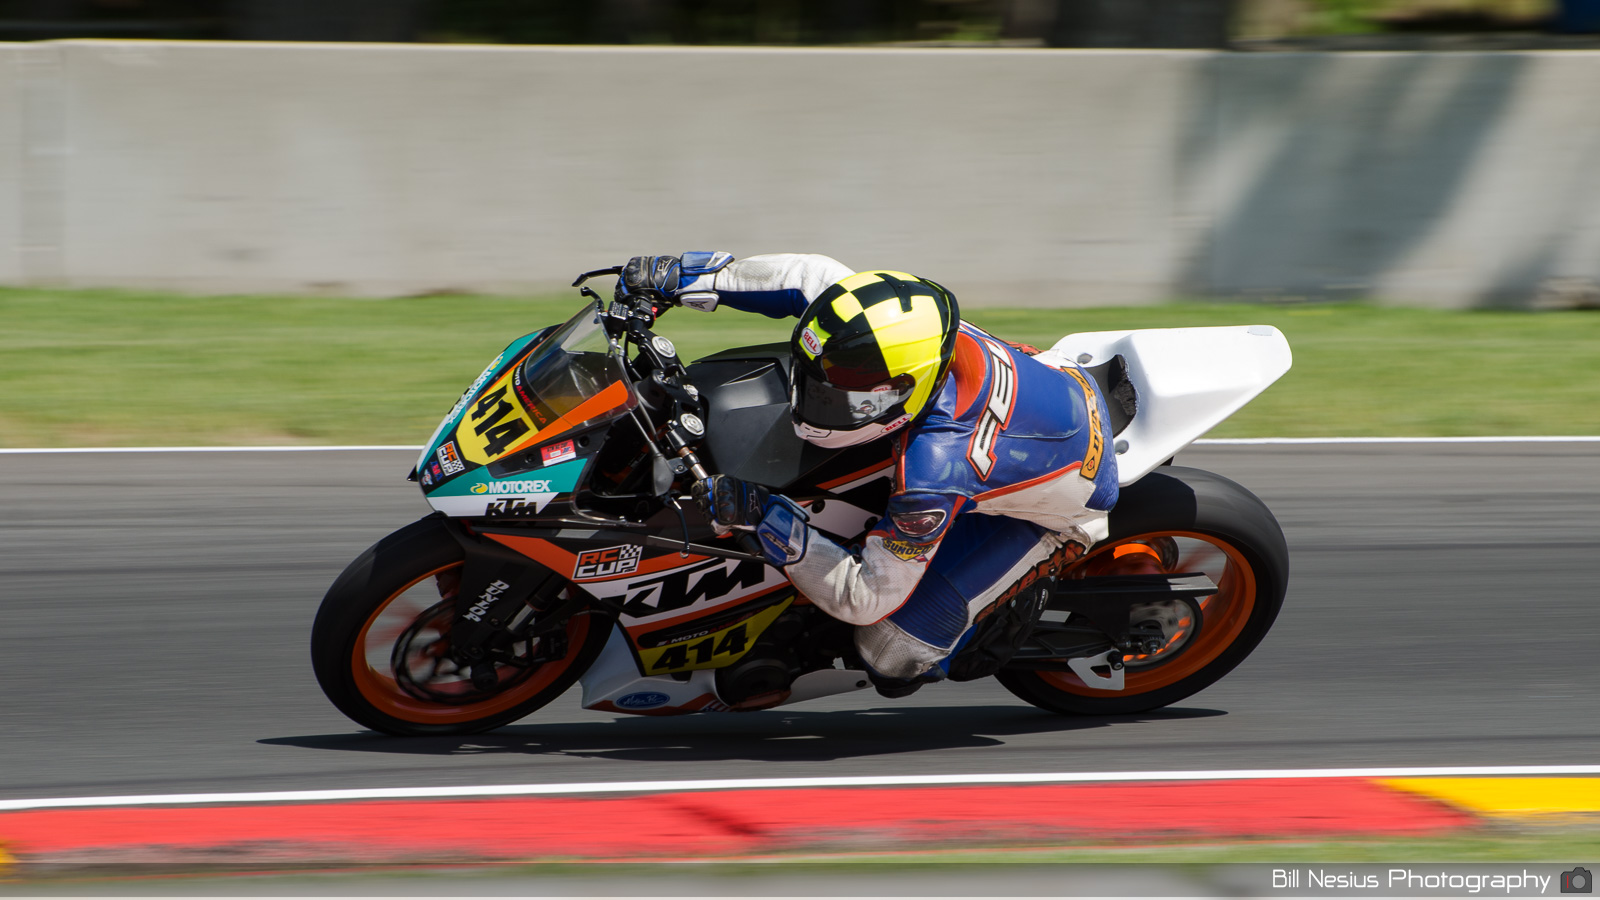 Jake Fell on the No.414 KTM RC Cup in thurn 6 / DSC_4427 / 4